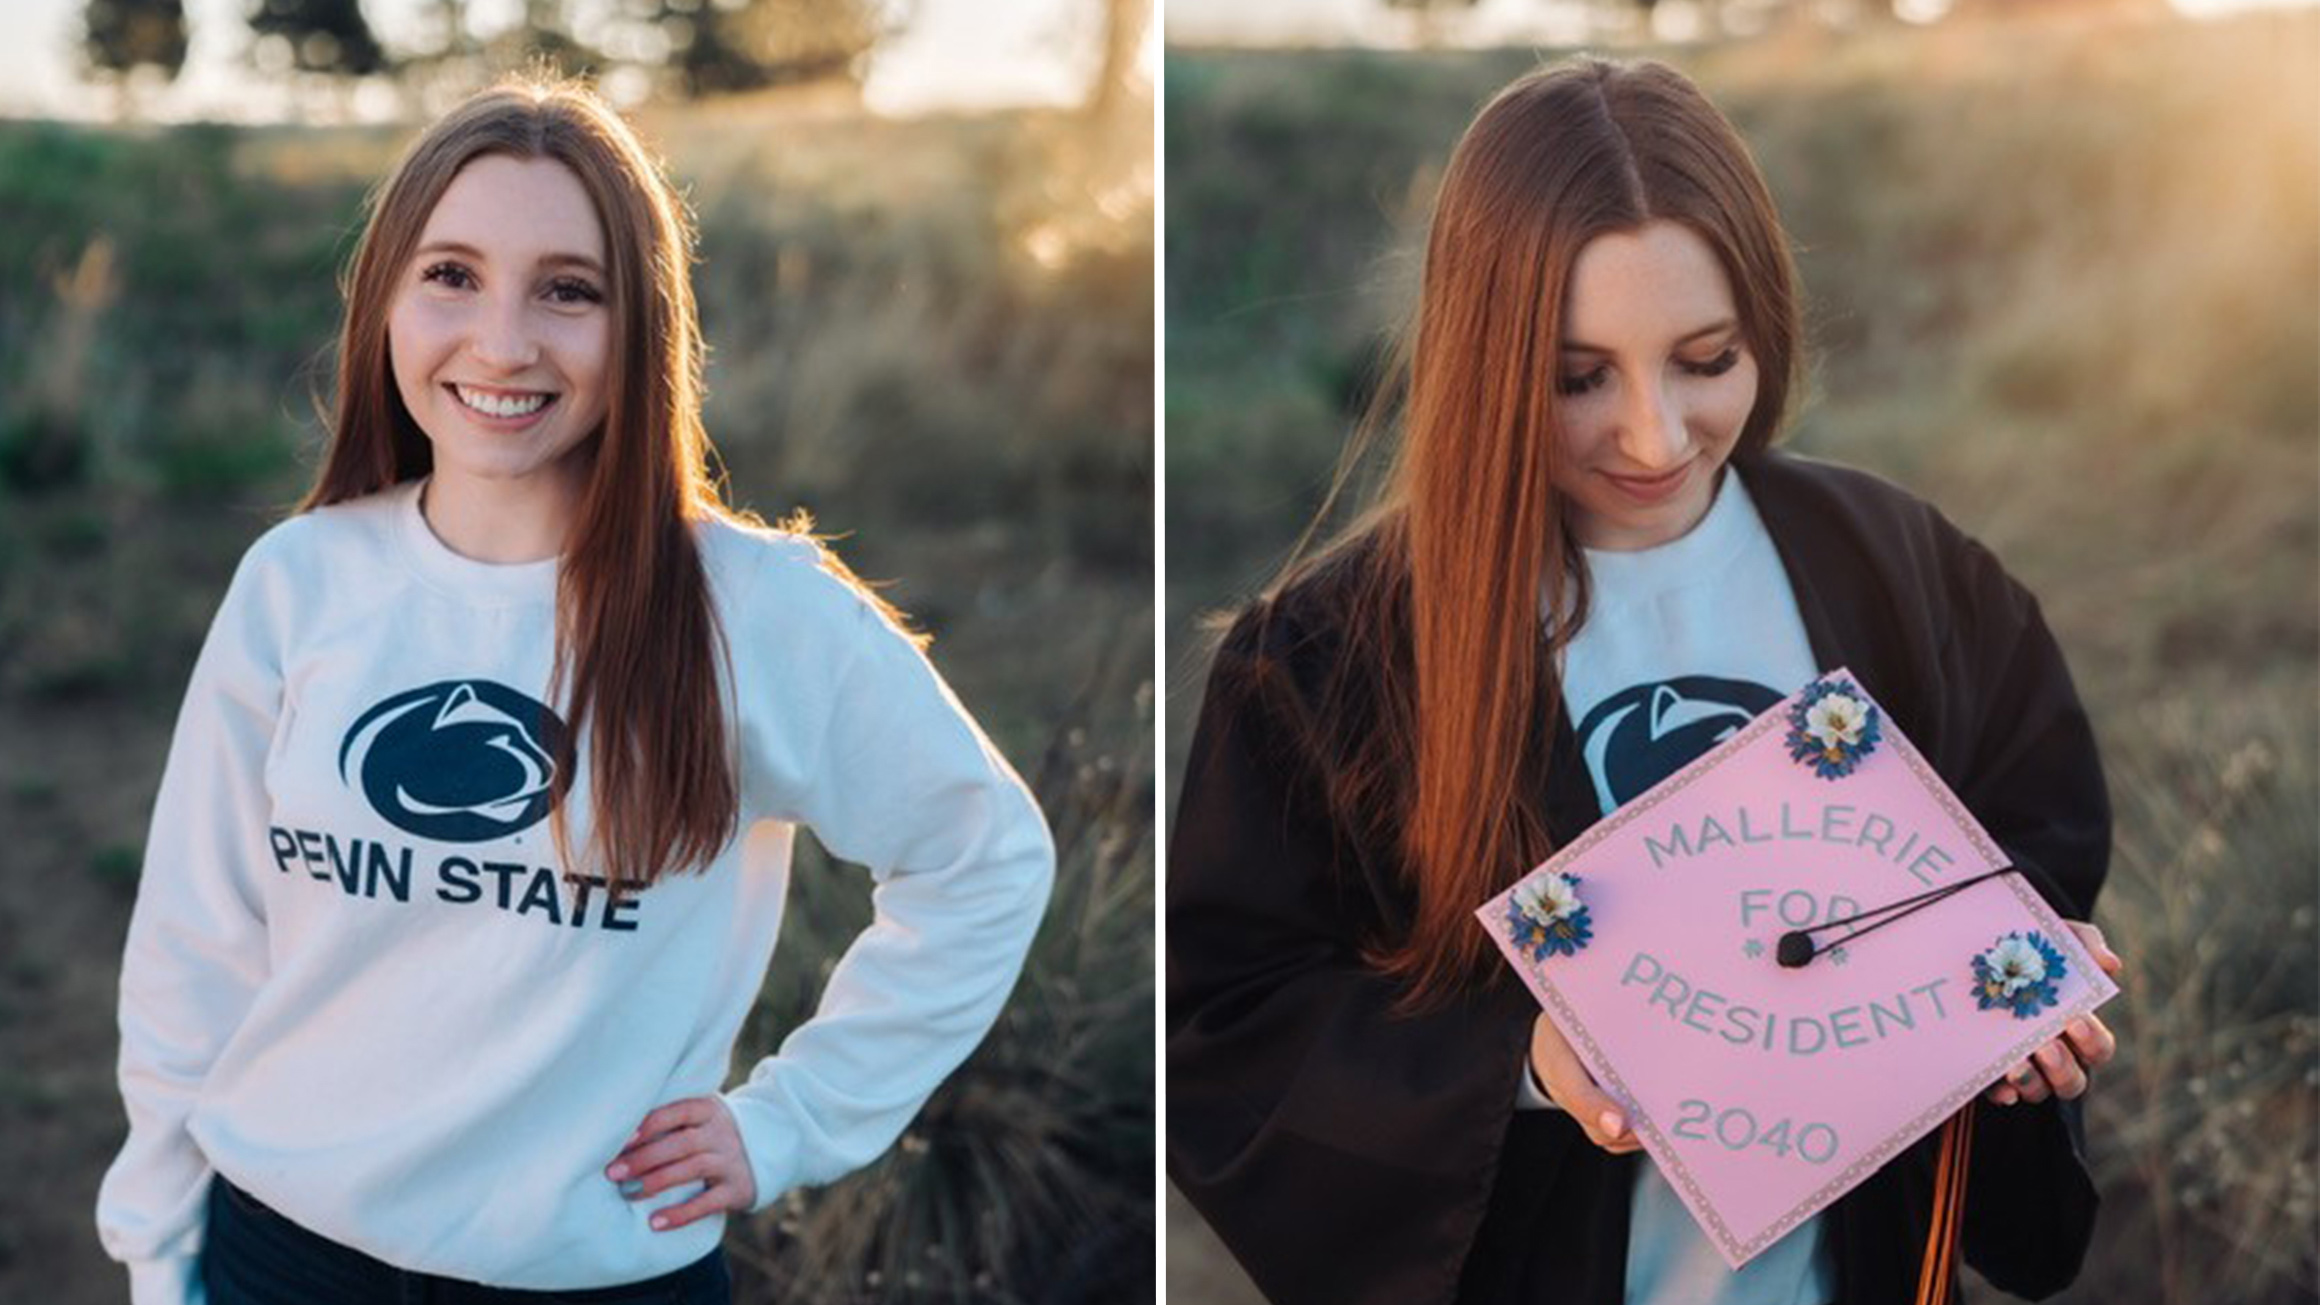 Portraits of Mallerie Stromswold show her wearing Penn State apparel